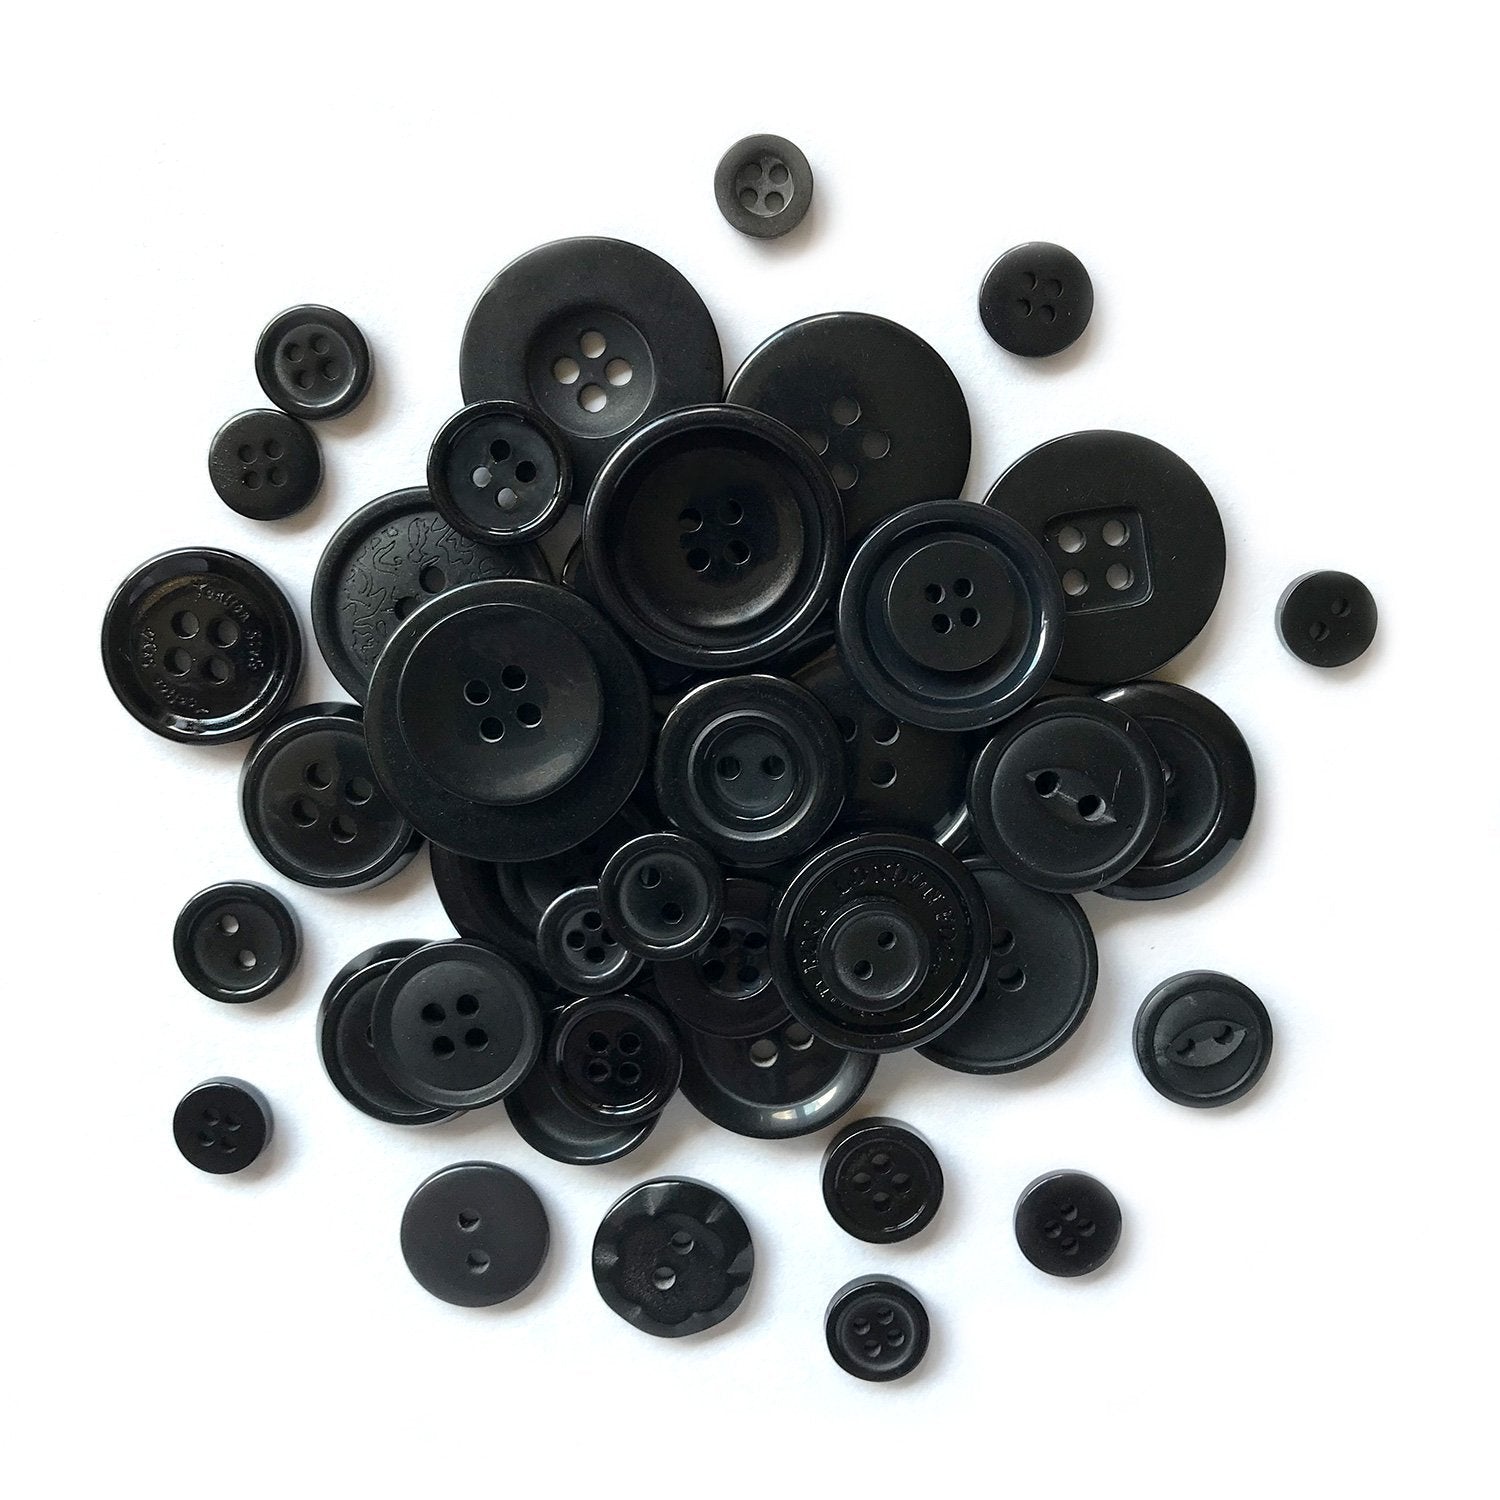 160PCS Black Buttons for Sewing Resin Craft Buttons 4-Hole Buttons for  Sewing 5 Sizes of Black White Round Mixed Buttons Small Black and White  Buttons